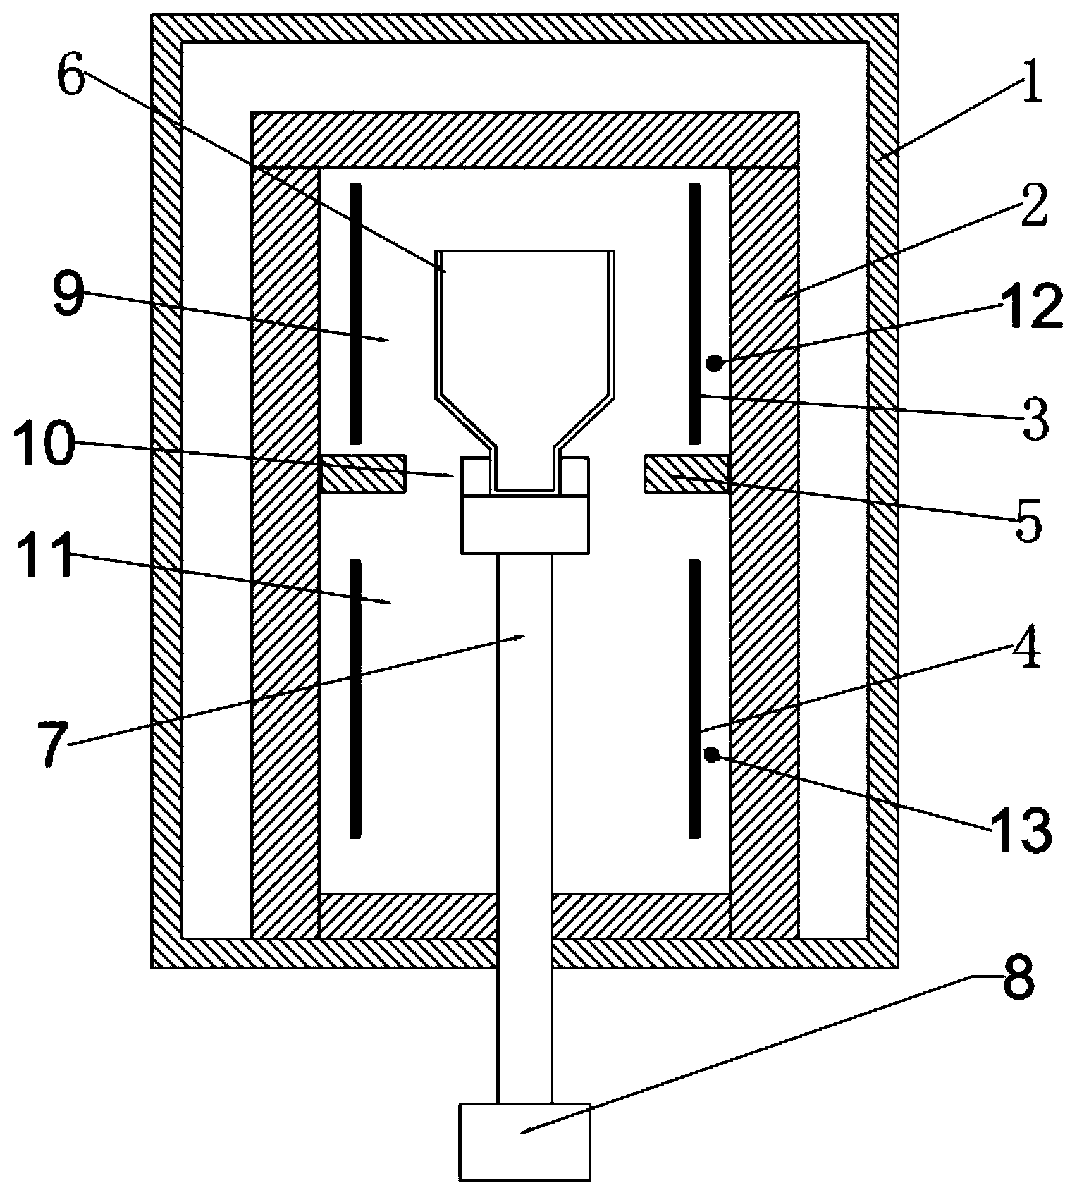 Large-size Yb,R:CaF2/SrF2 laser crystal and preparation method thereof